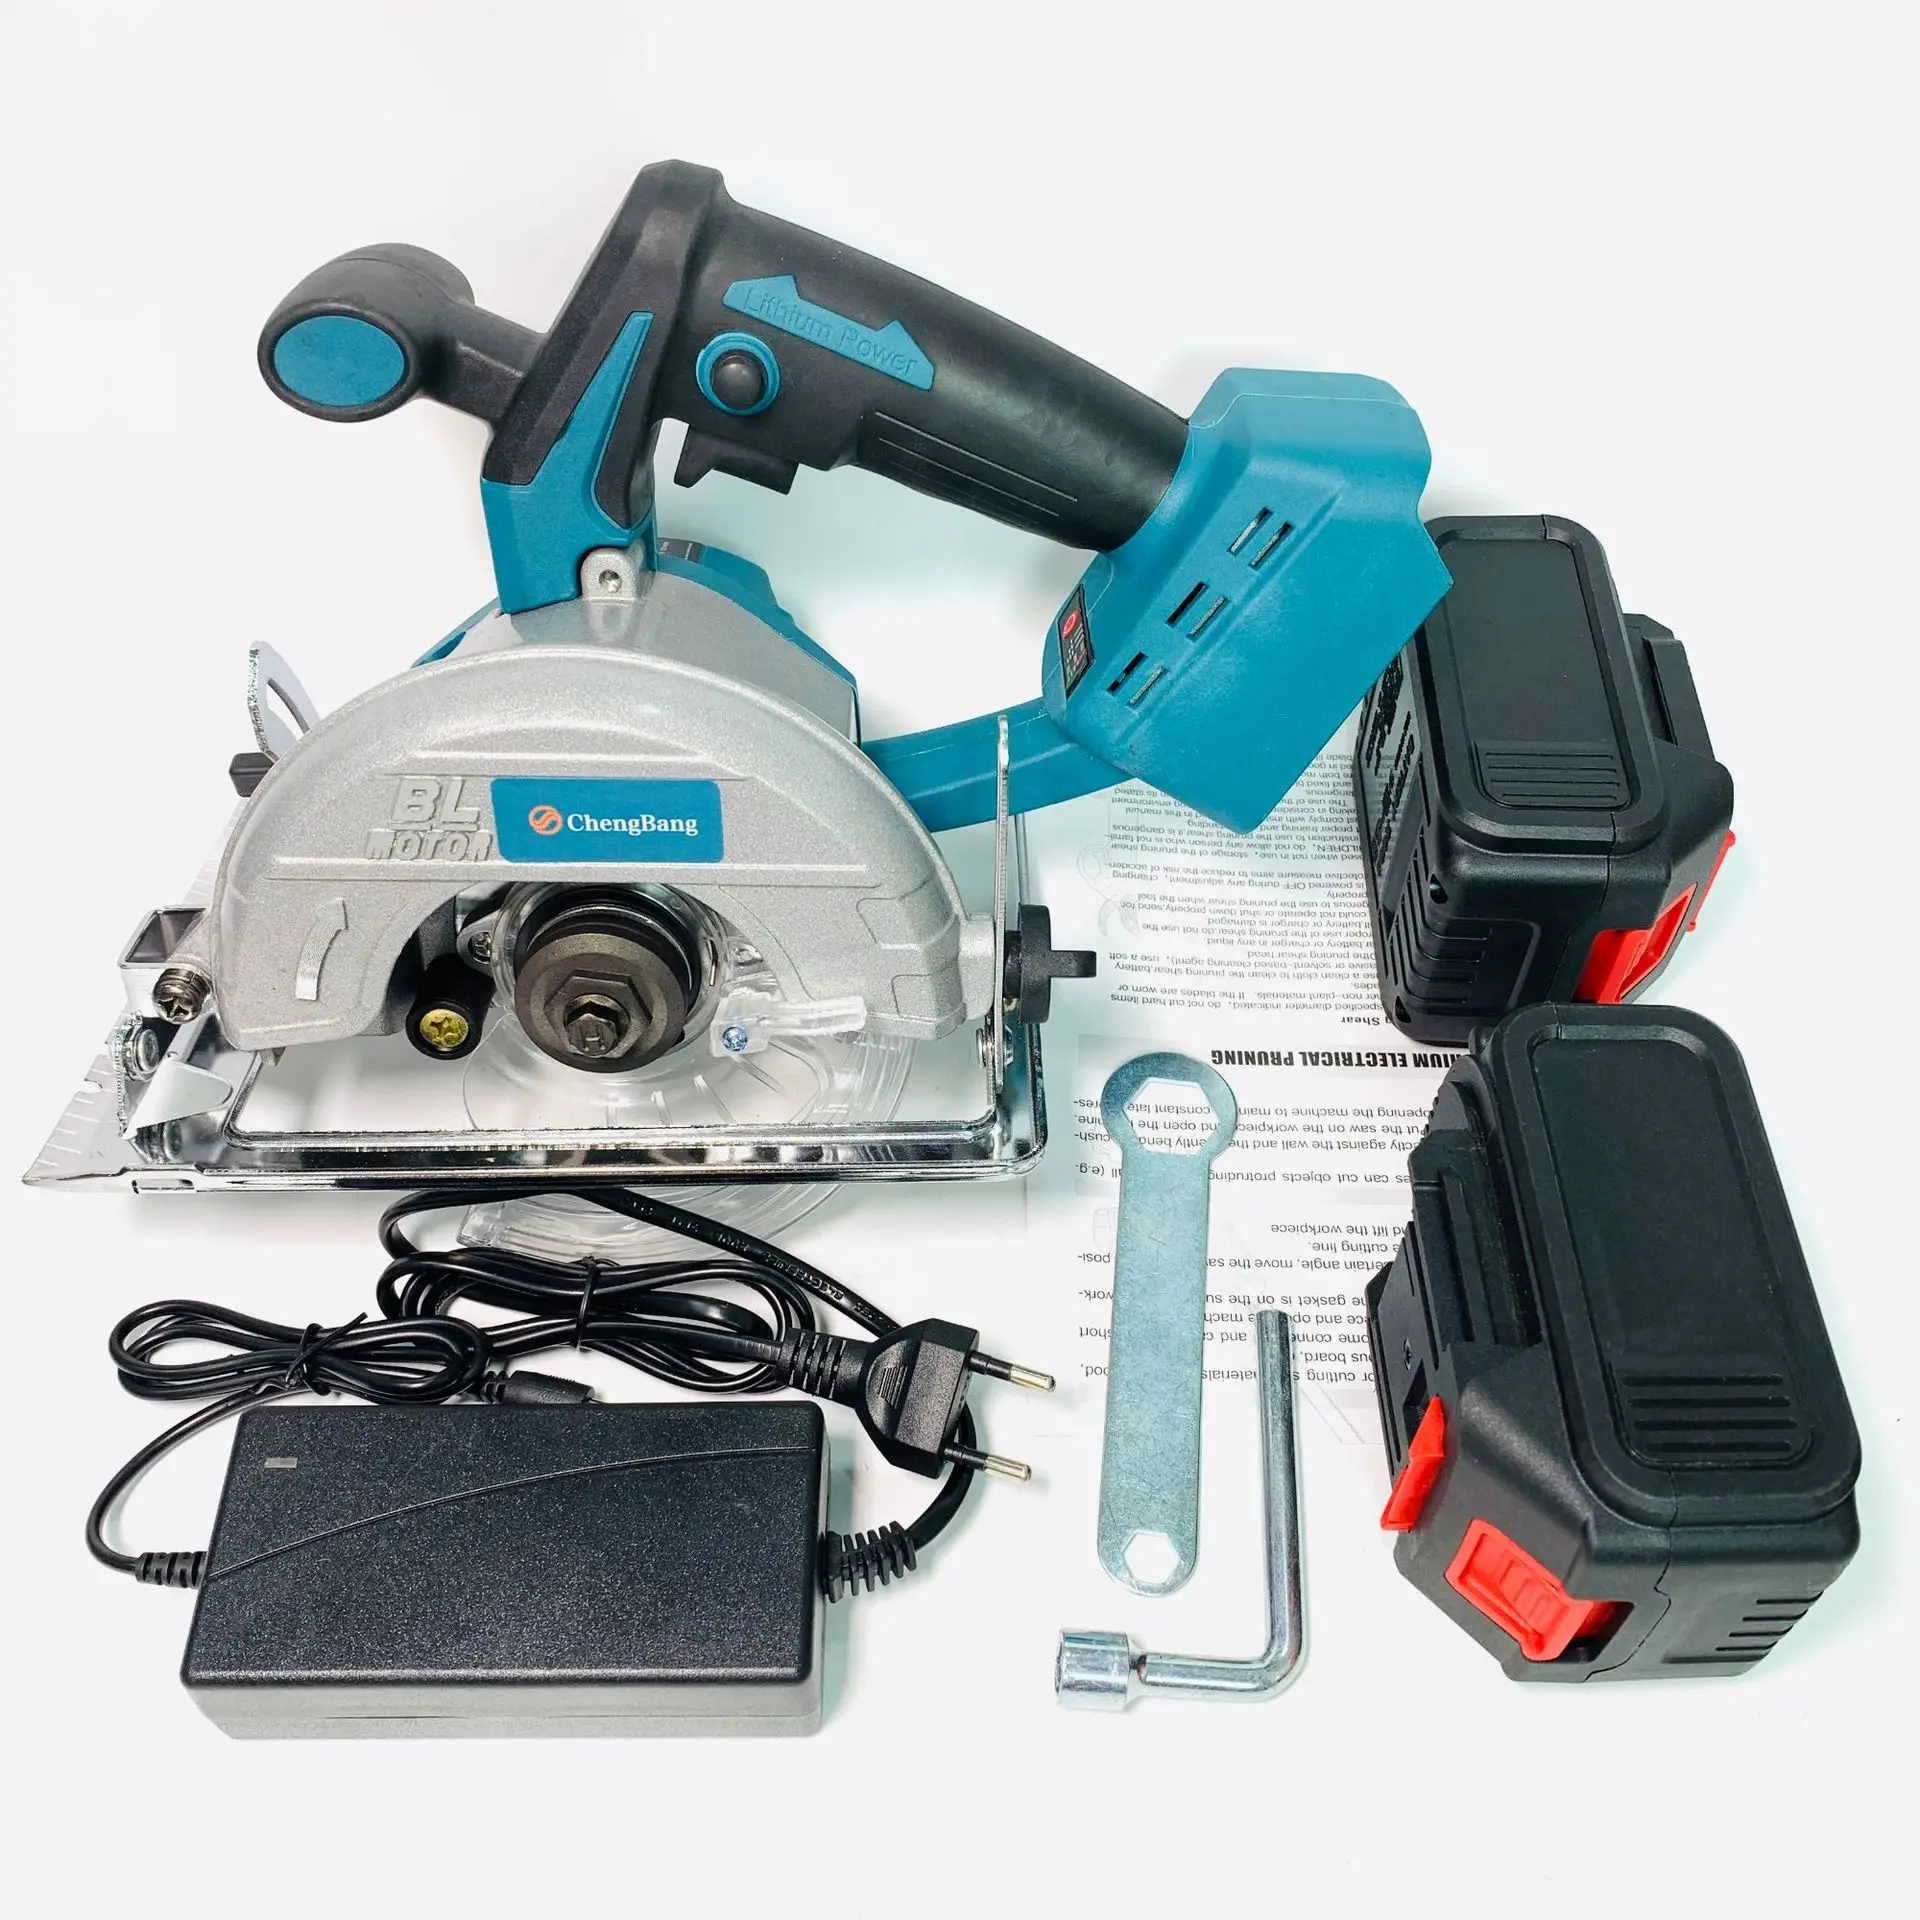 

Optimal product lithium electric brushless electric circular saw 5 "01 charging saw 125 mm portable cutting machine